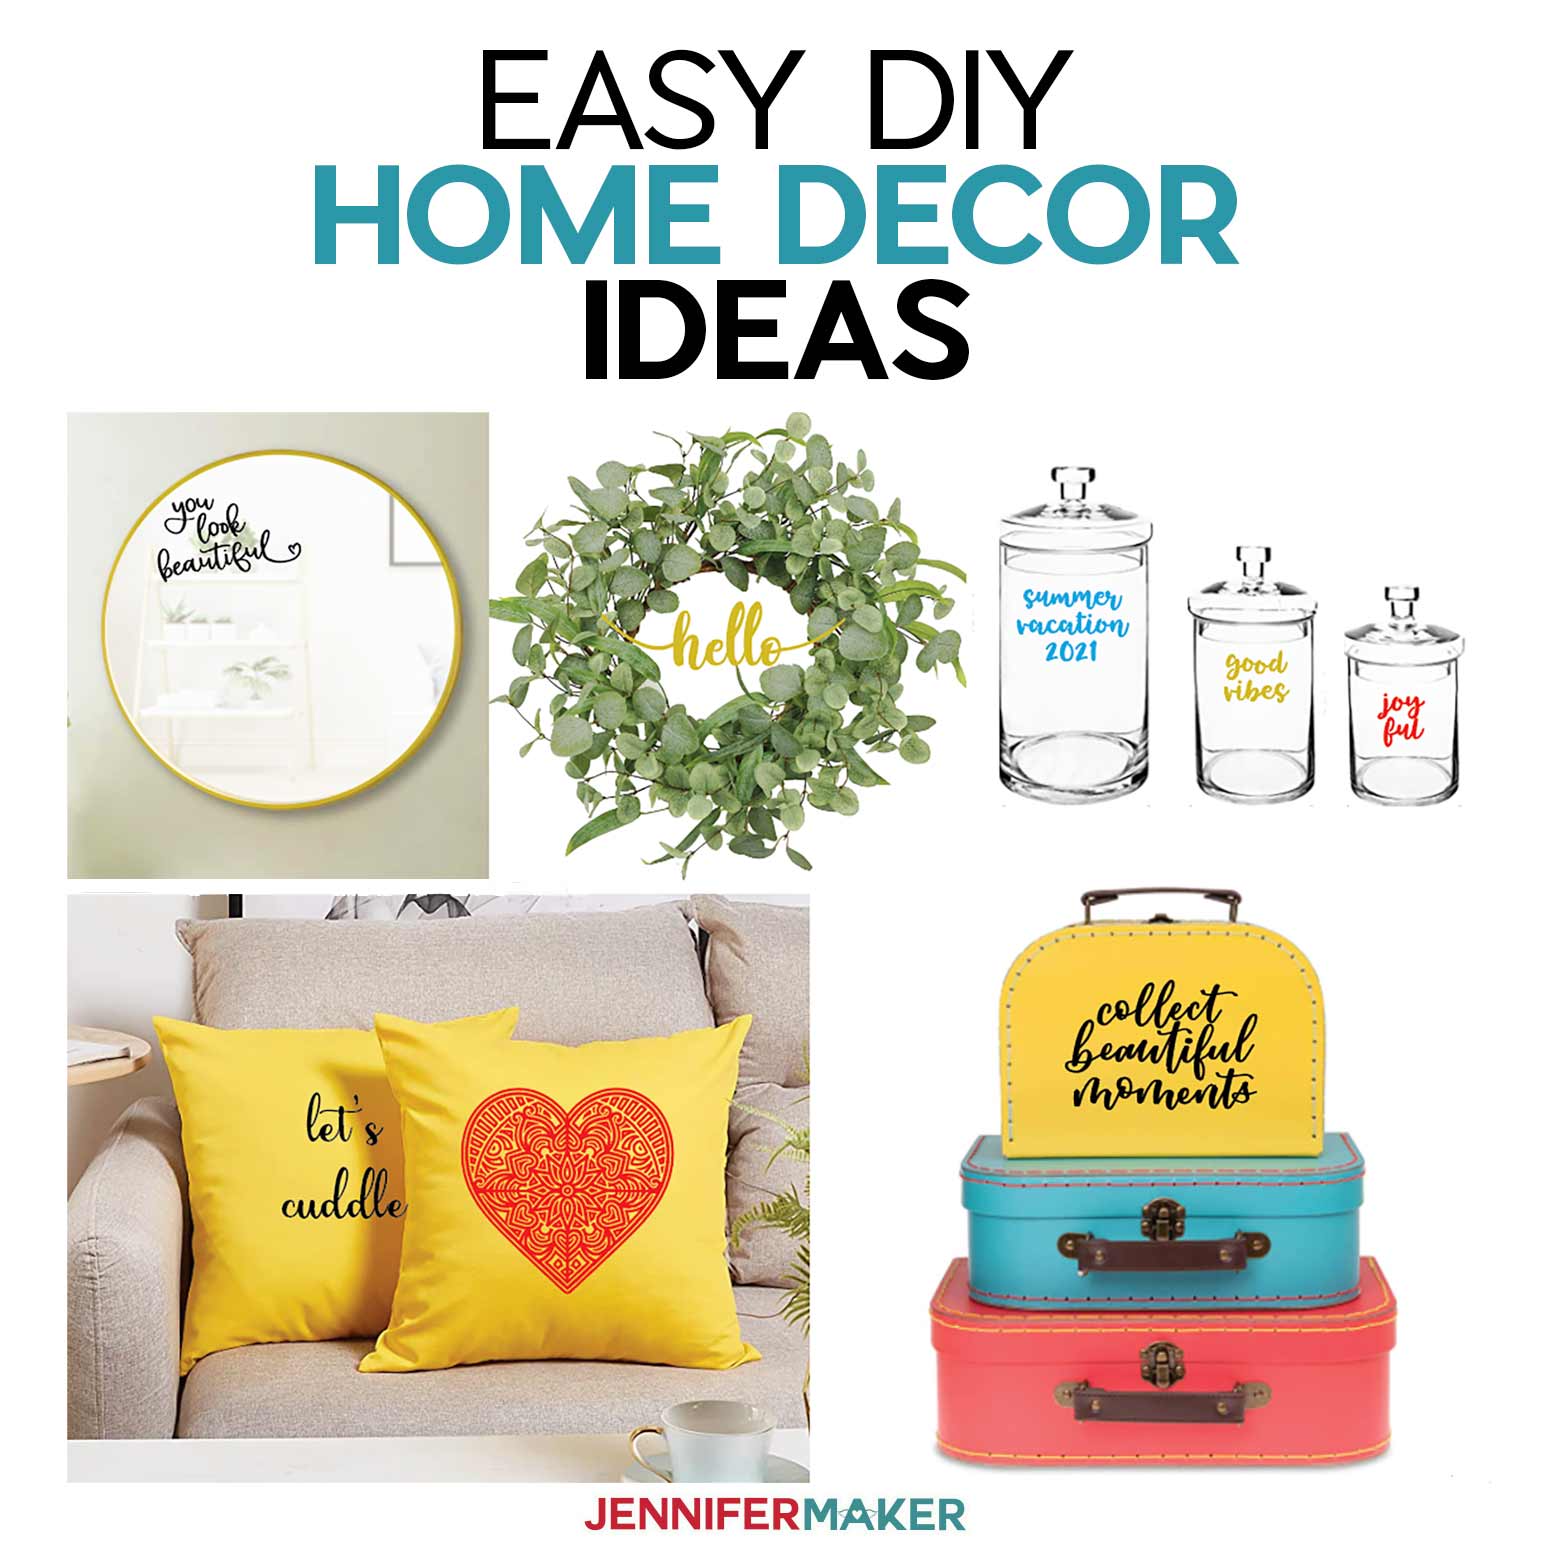 Easy Home Decor Ideas You Can Personalize with a Cricut!